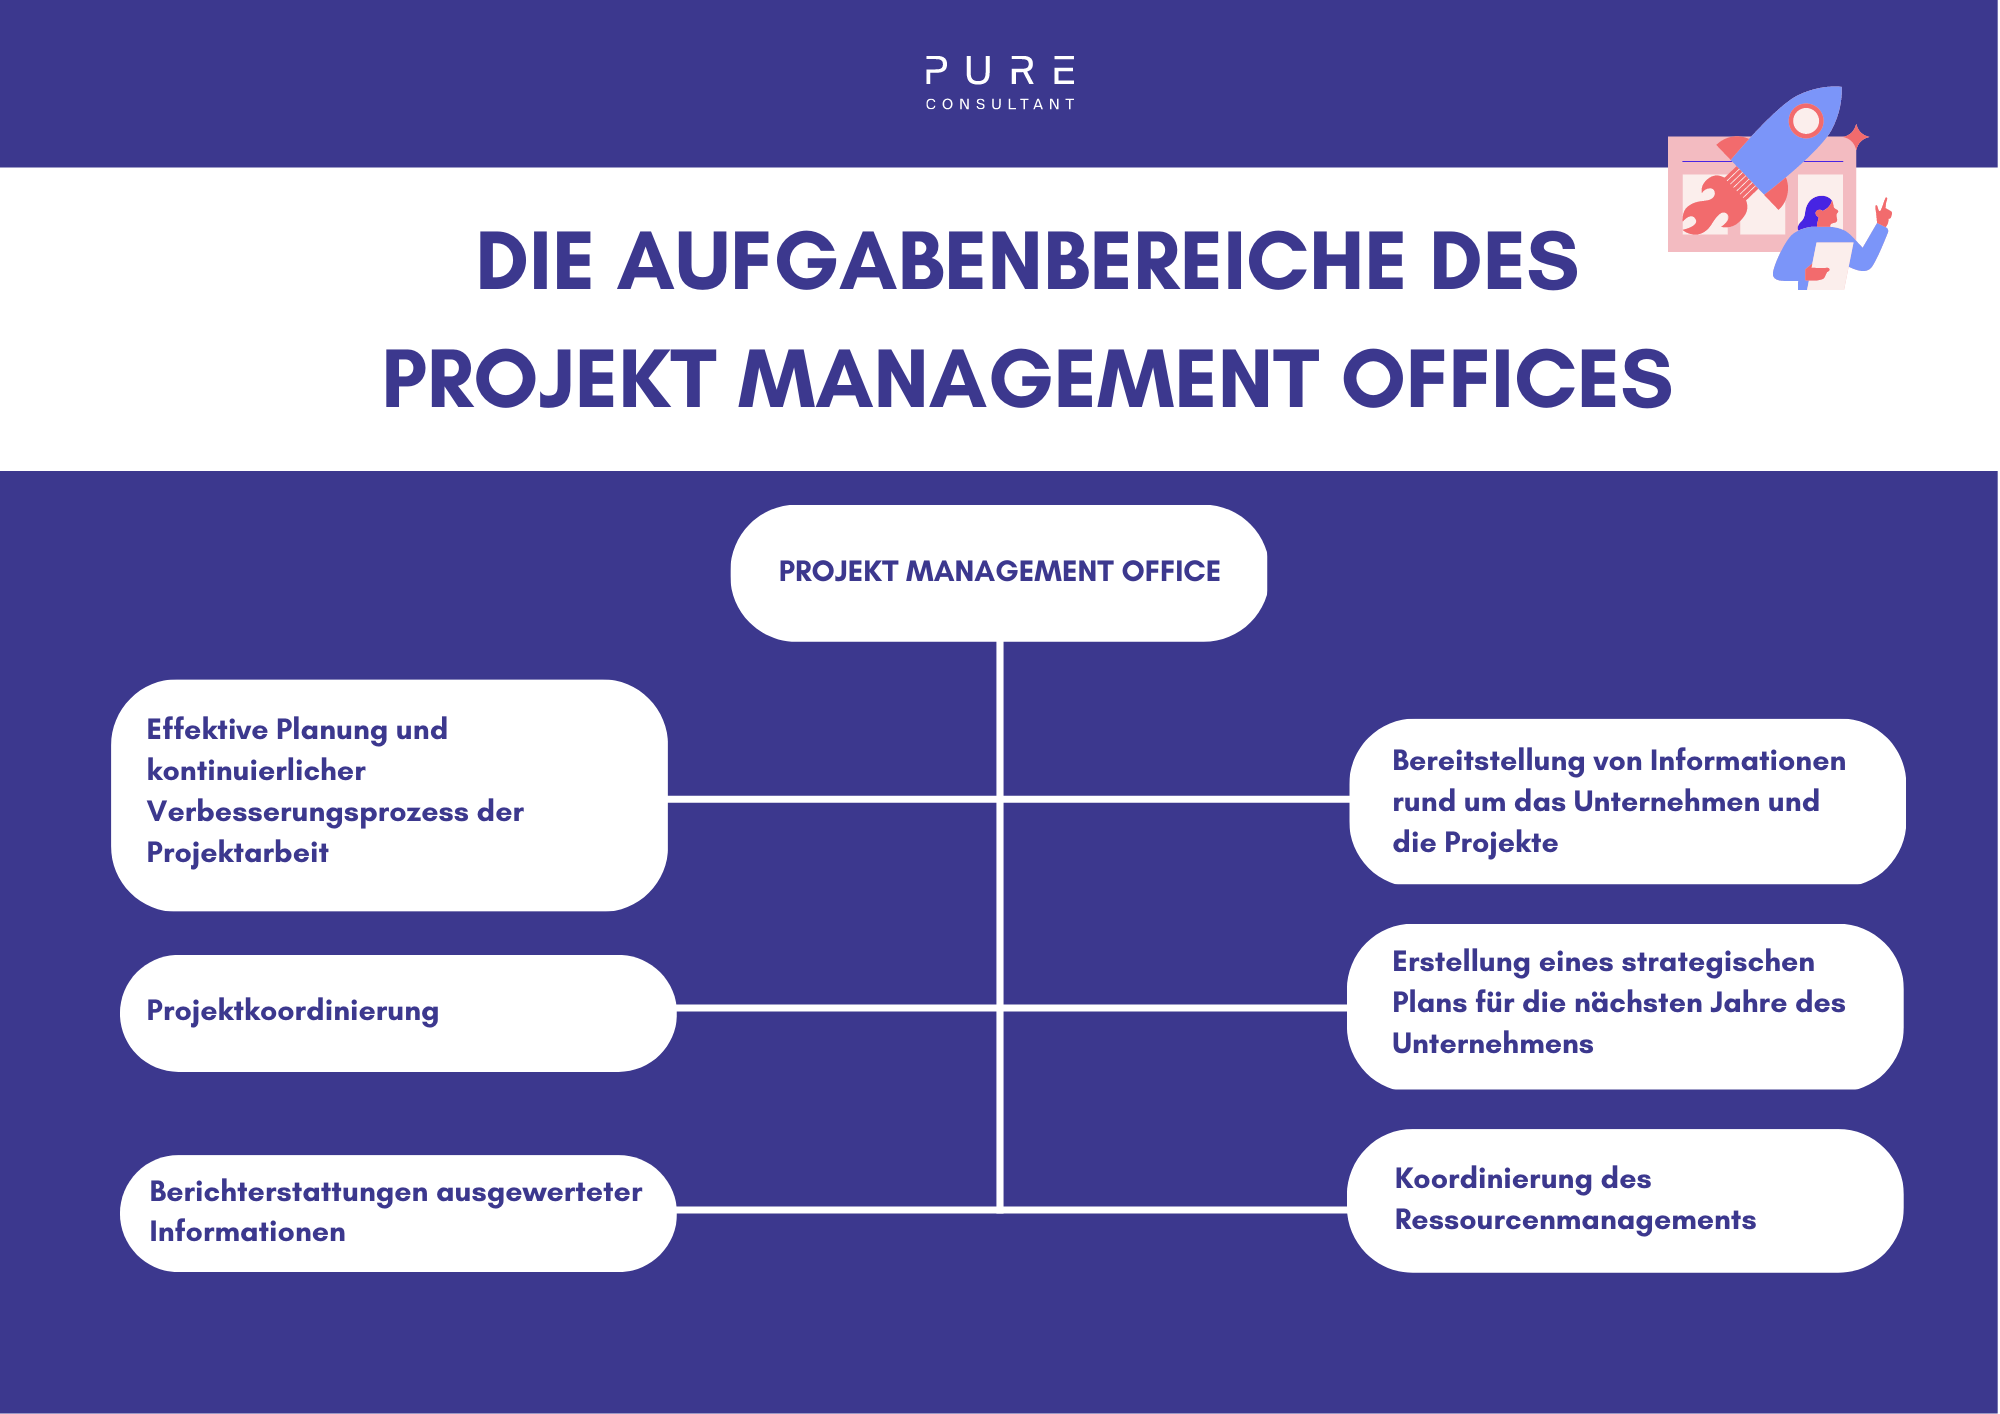 PMO - Project Management Office